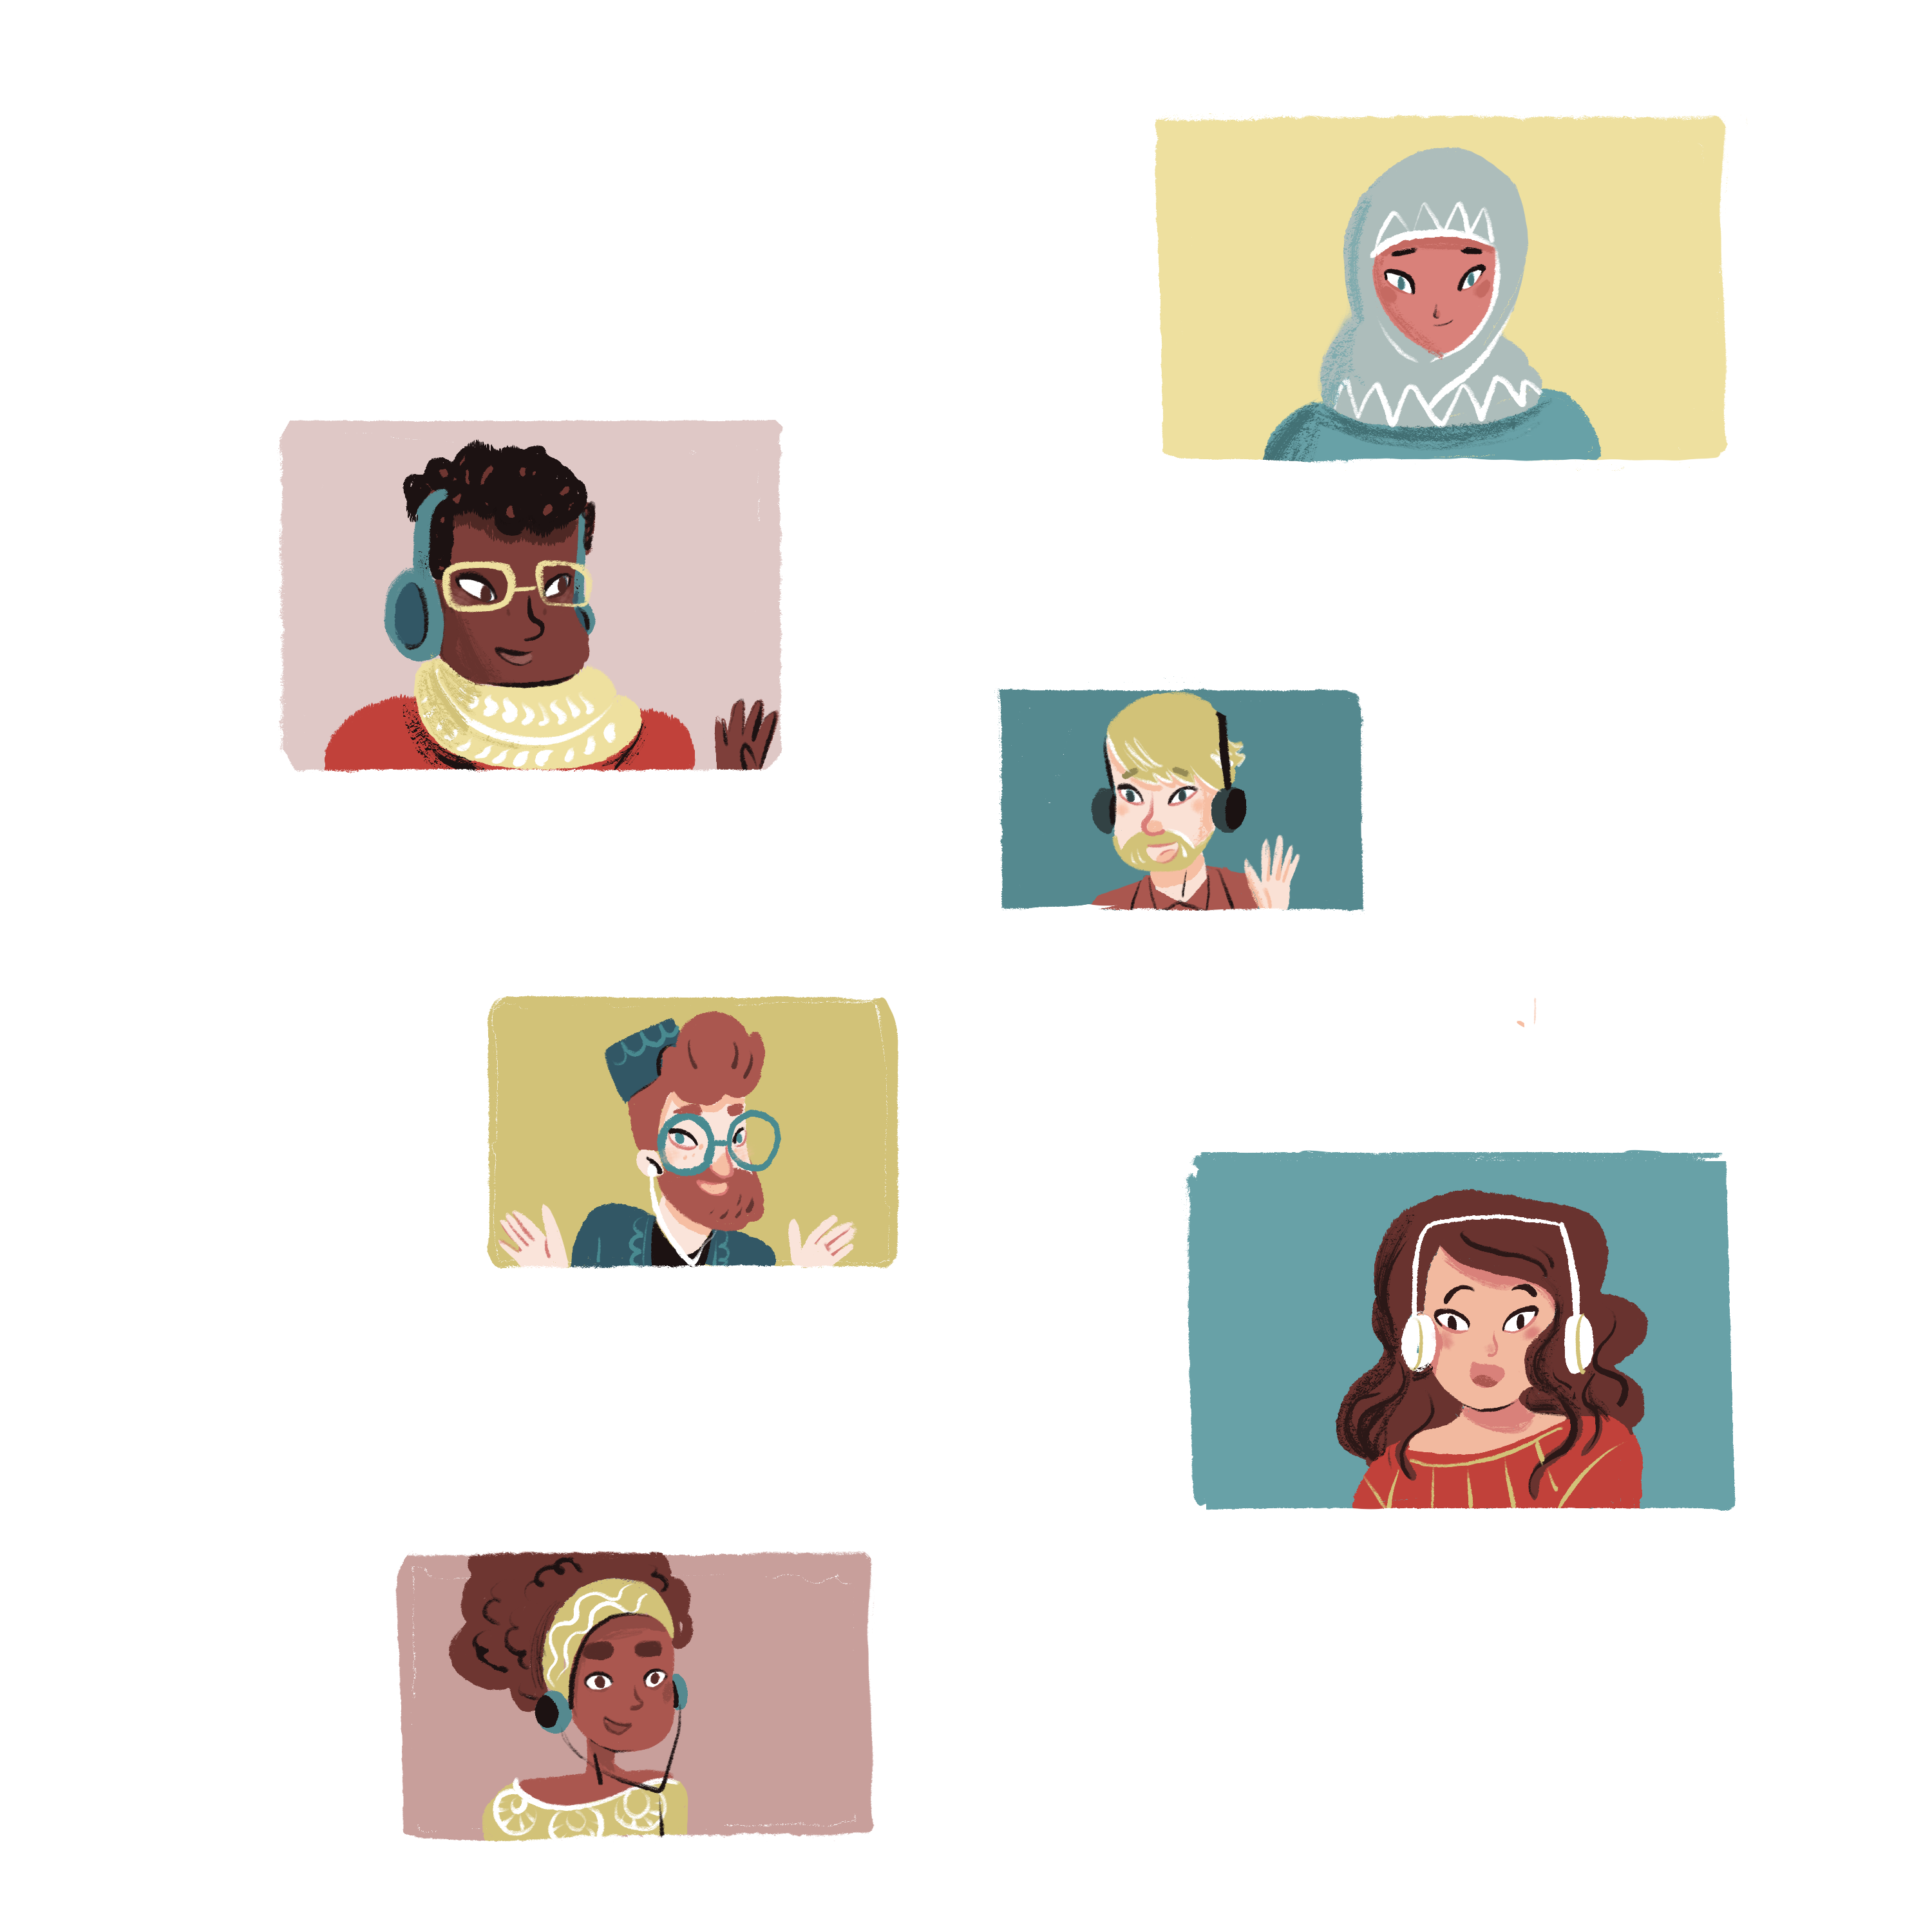 Illustration representing the virtual town hall: 6 faces on screens are interconnected via lines.